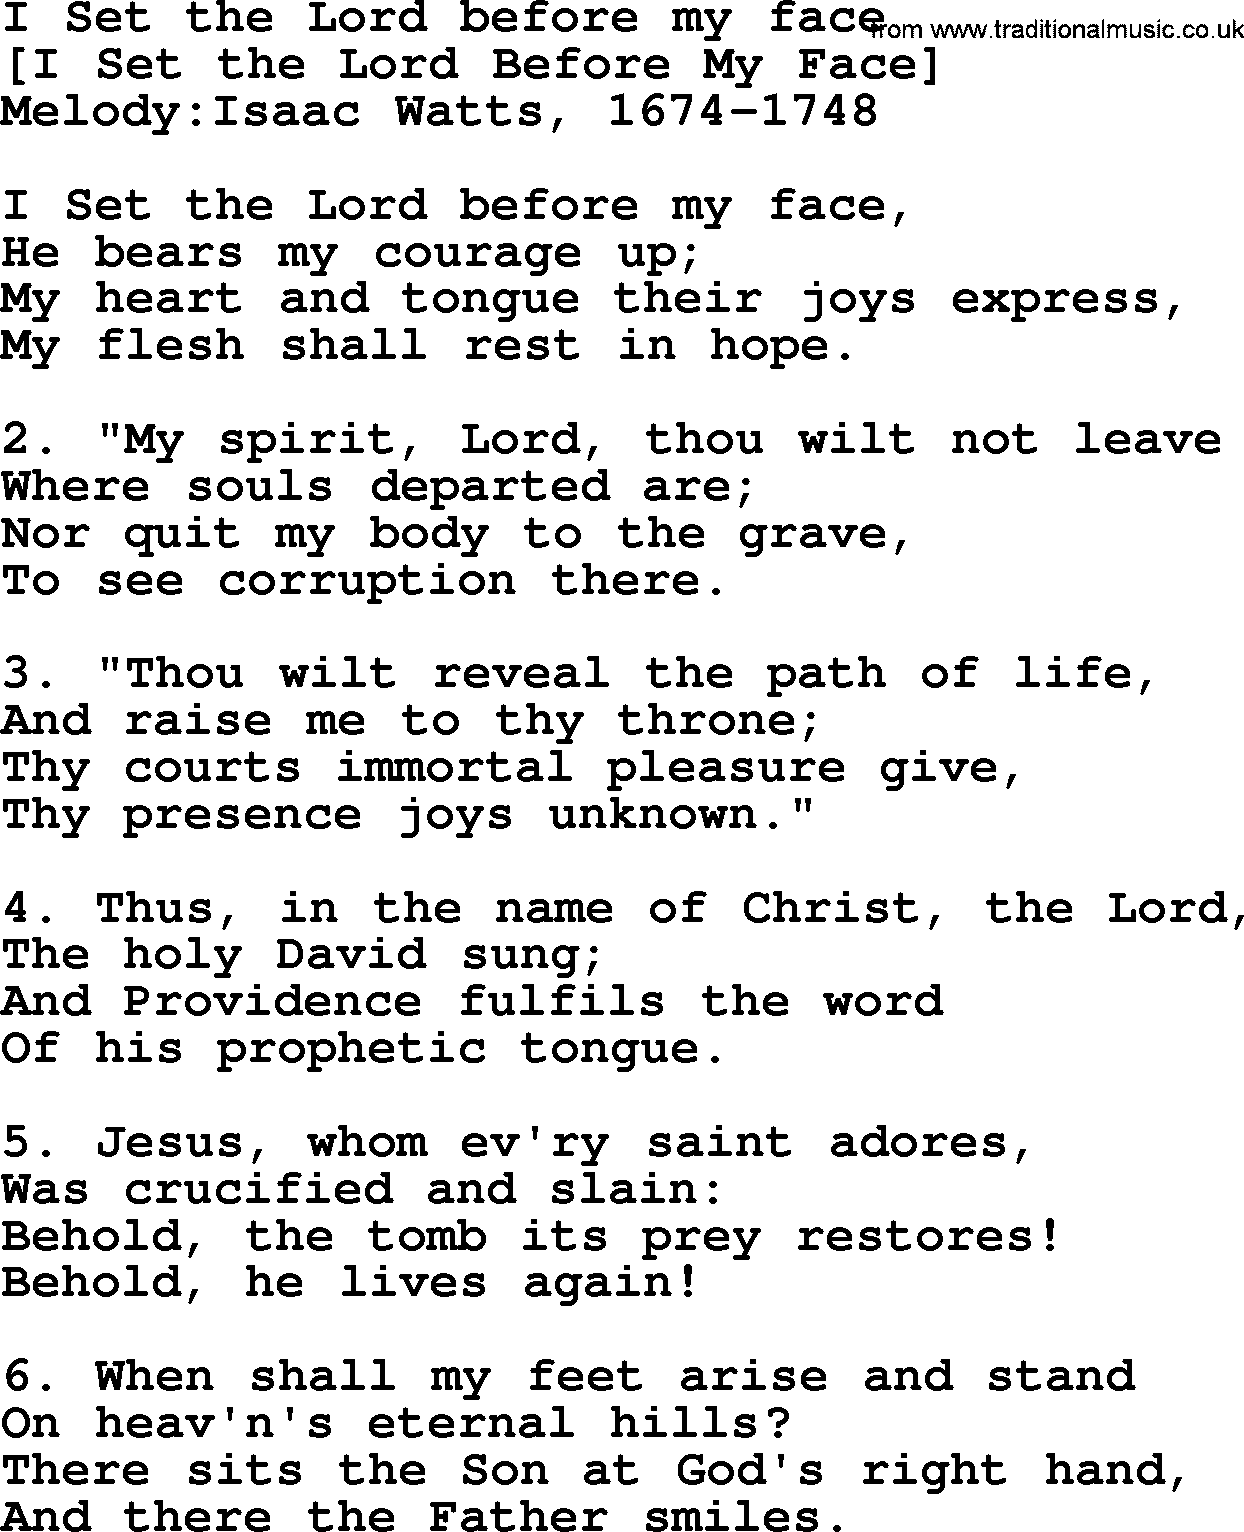 Old English Song: I Set The Lord Before My Face lyrics